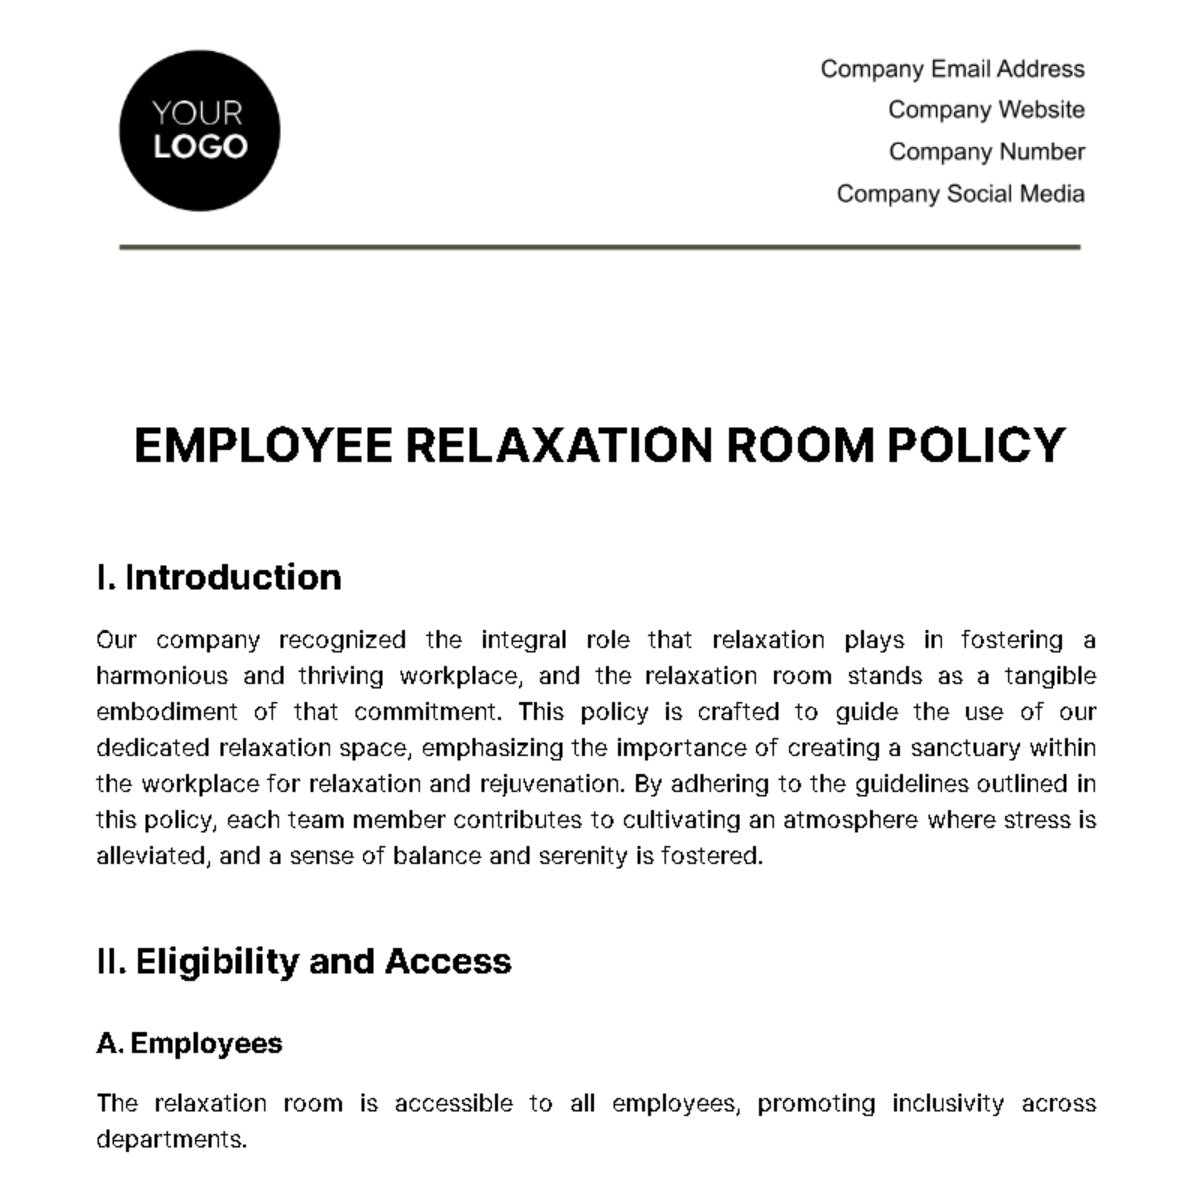 Employee Relaxation Room Policy Template